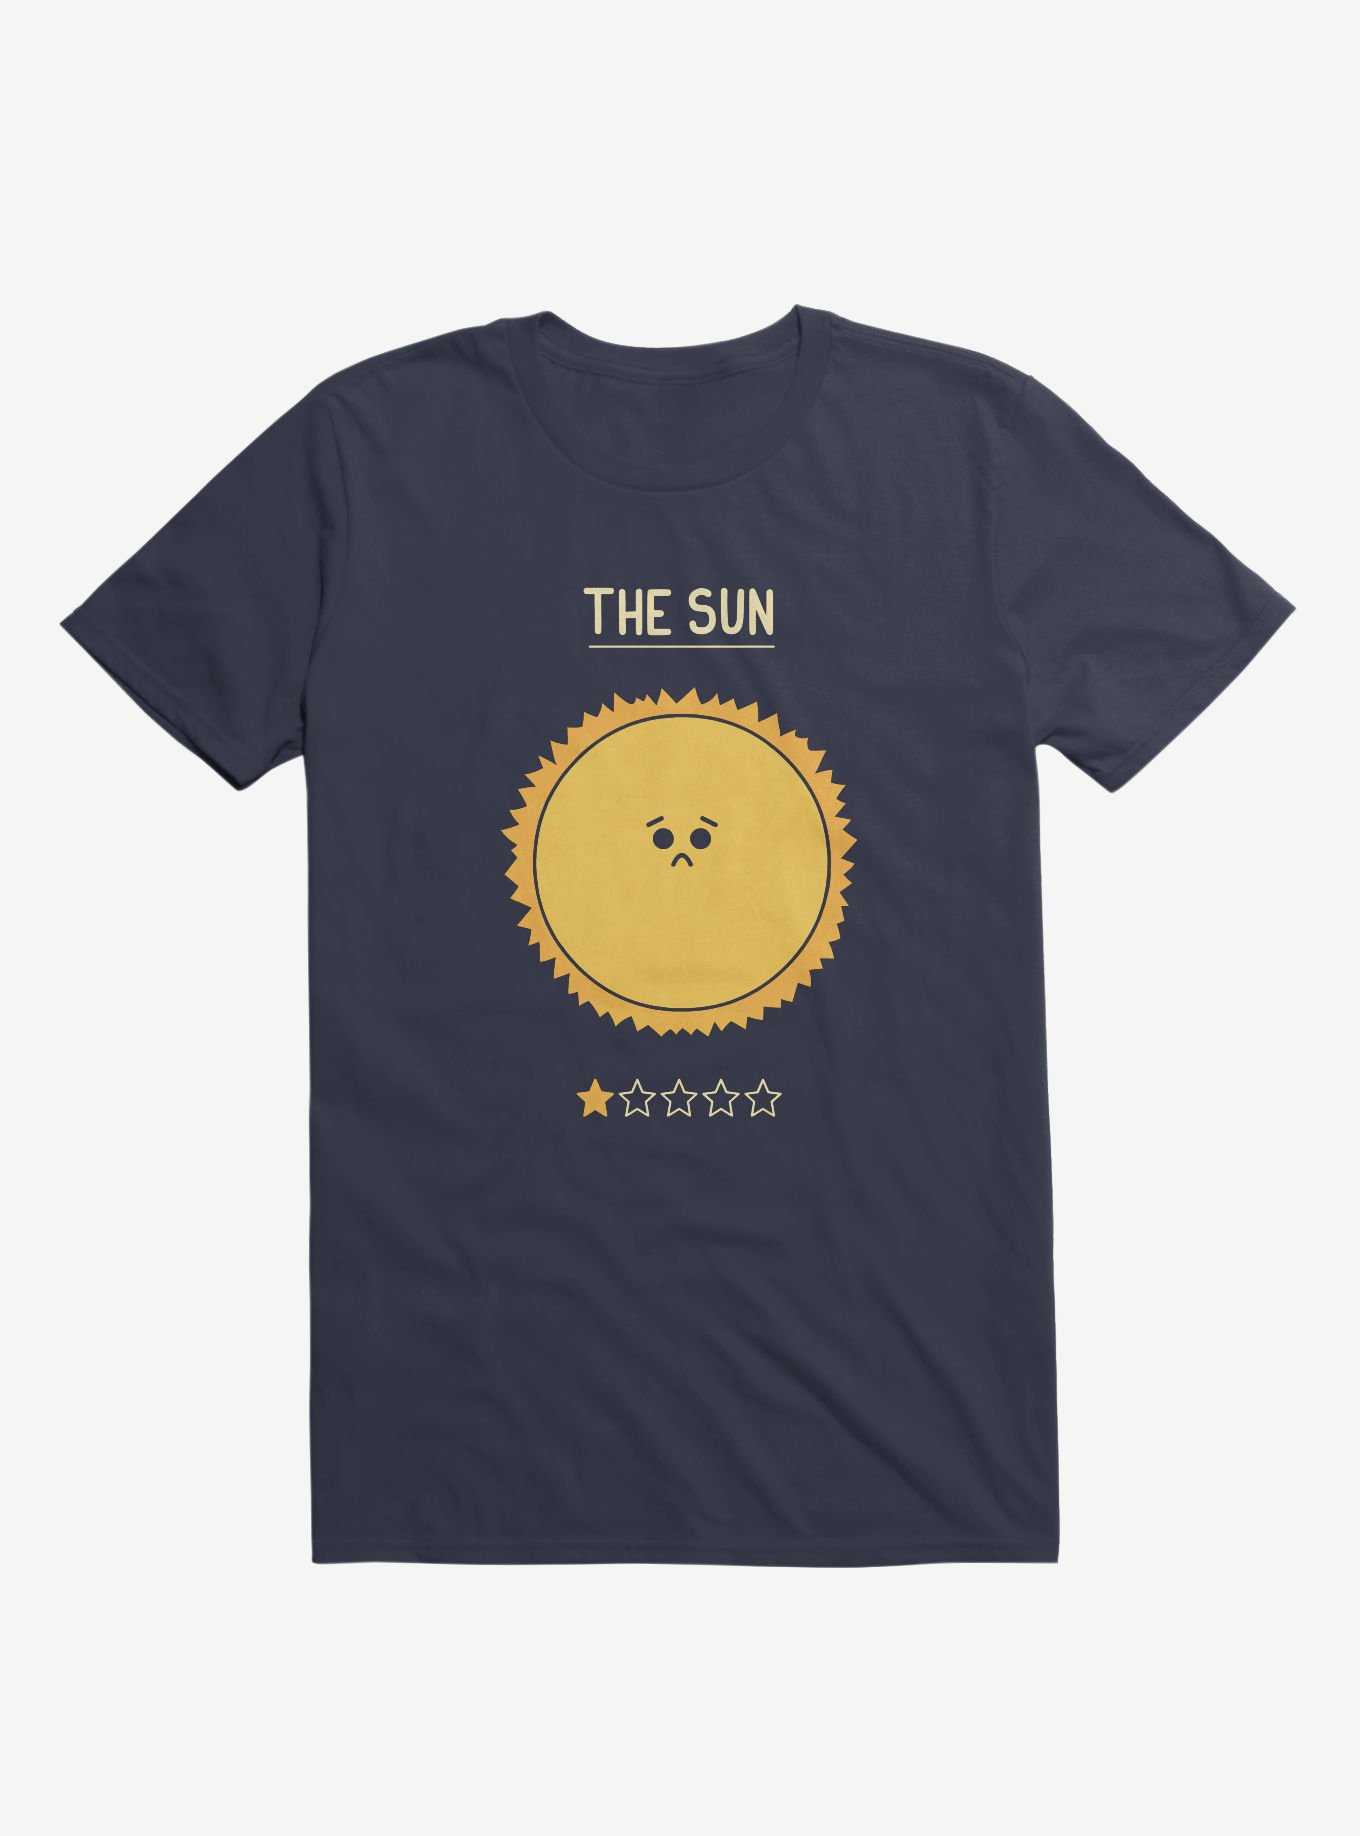 The Sun One Star Rating Navy Blue T-Shirt, , hi-res